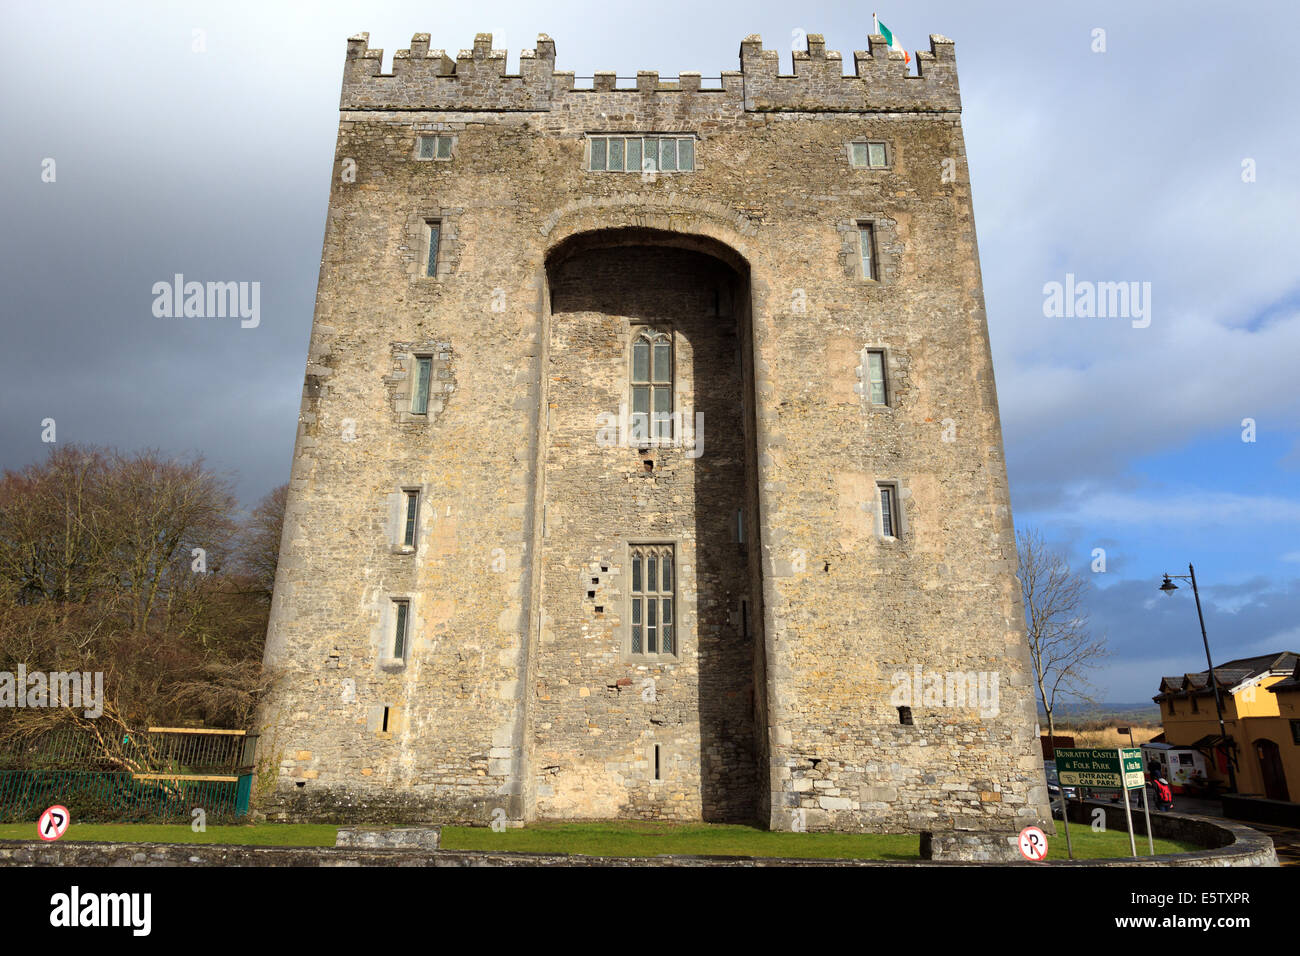 The Bunratty Castle in Ireland. The castle is a large tower house in Clare County. Stock Photo